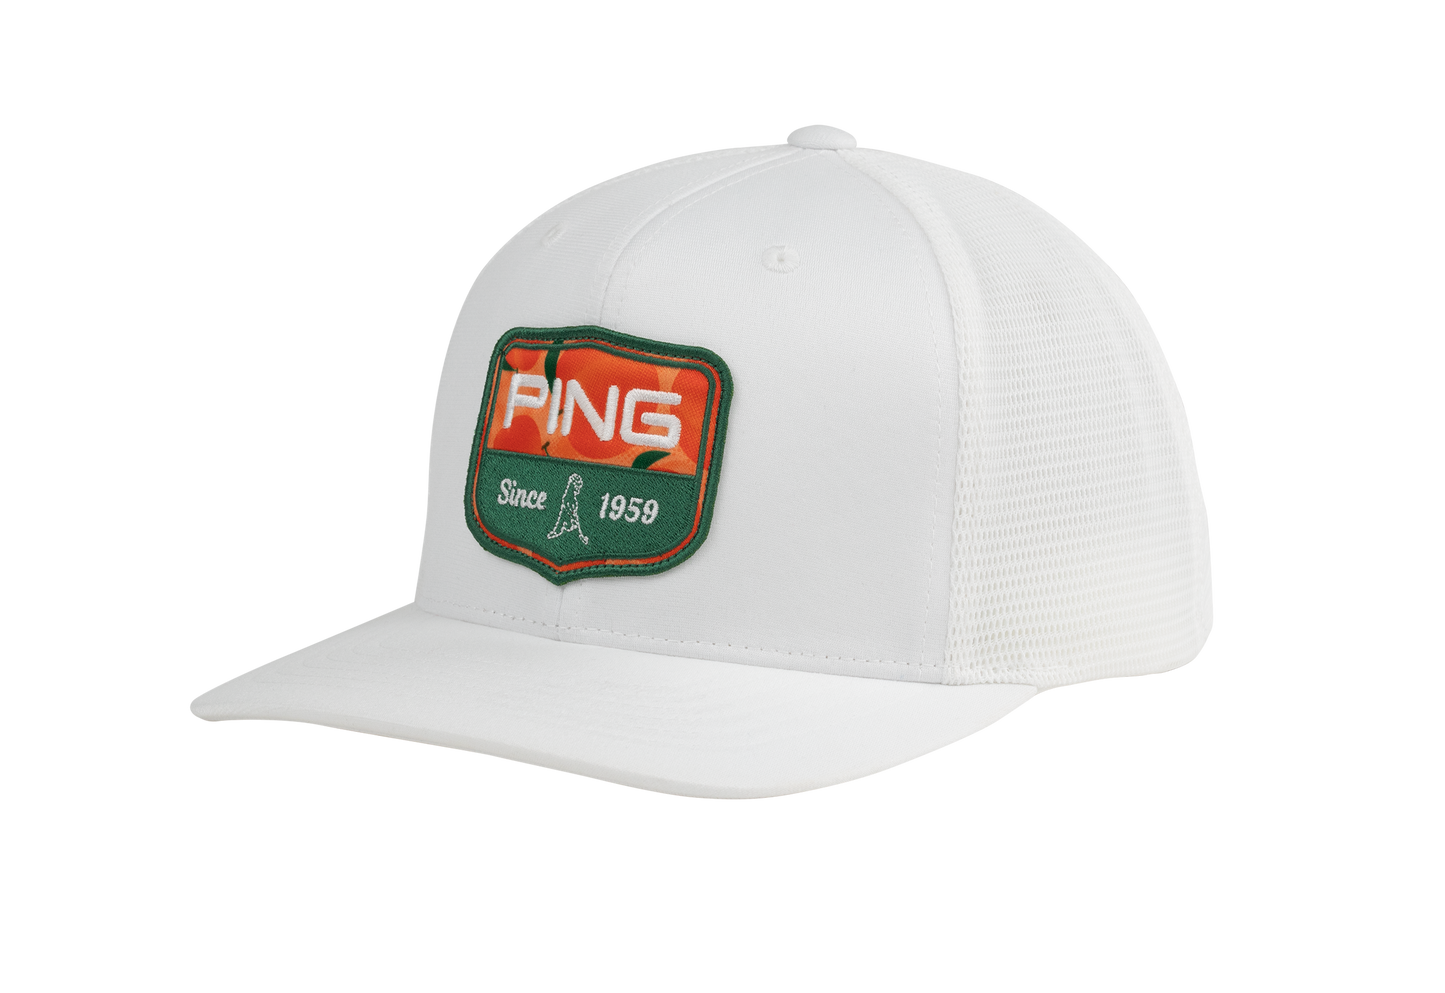 Ping Heritage Limited Edition White Cap